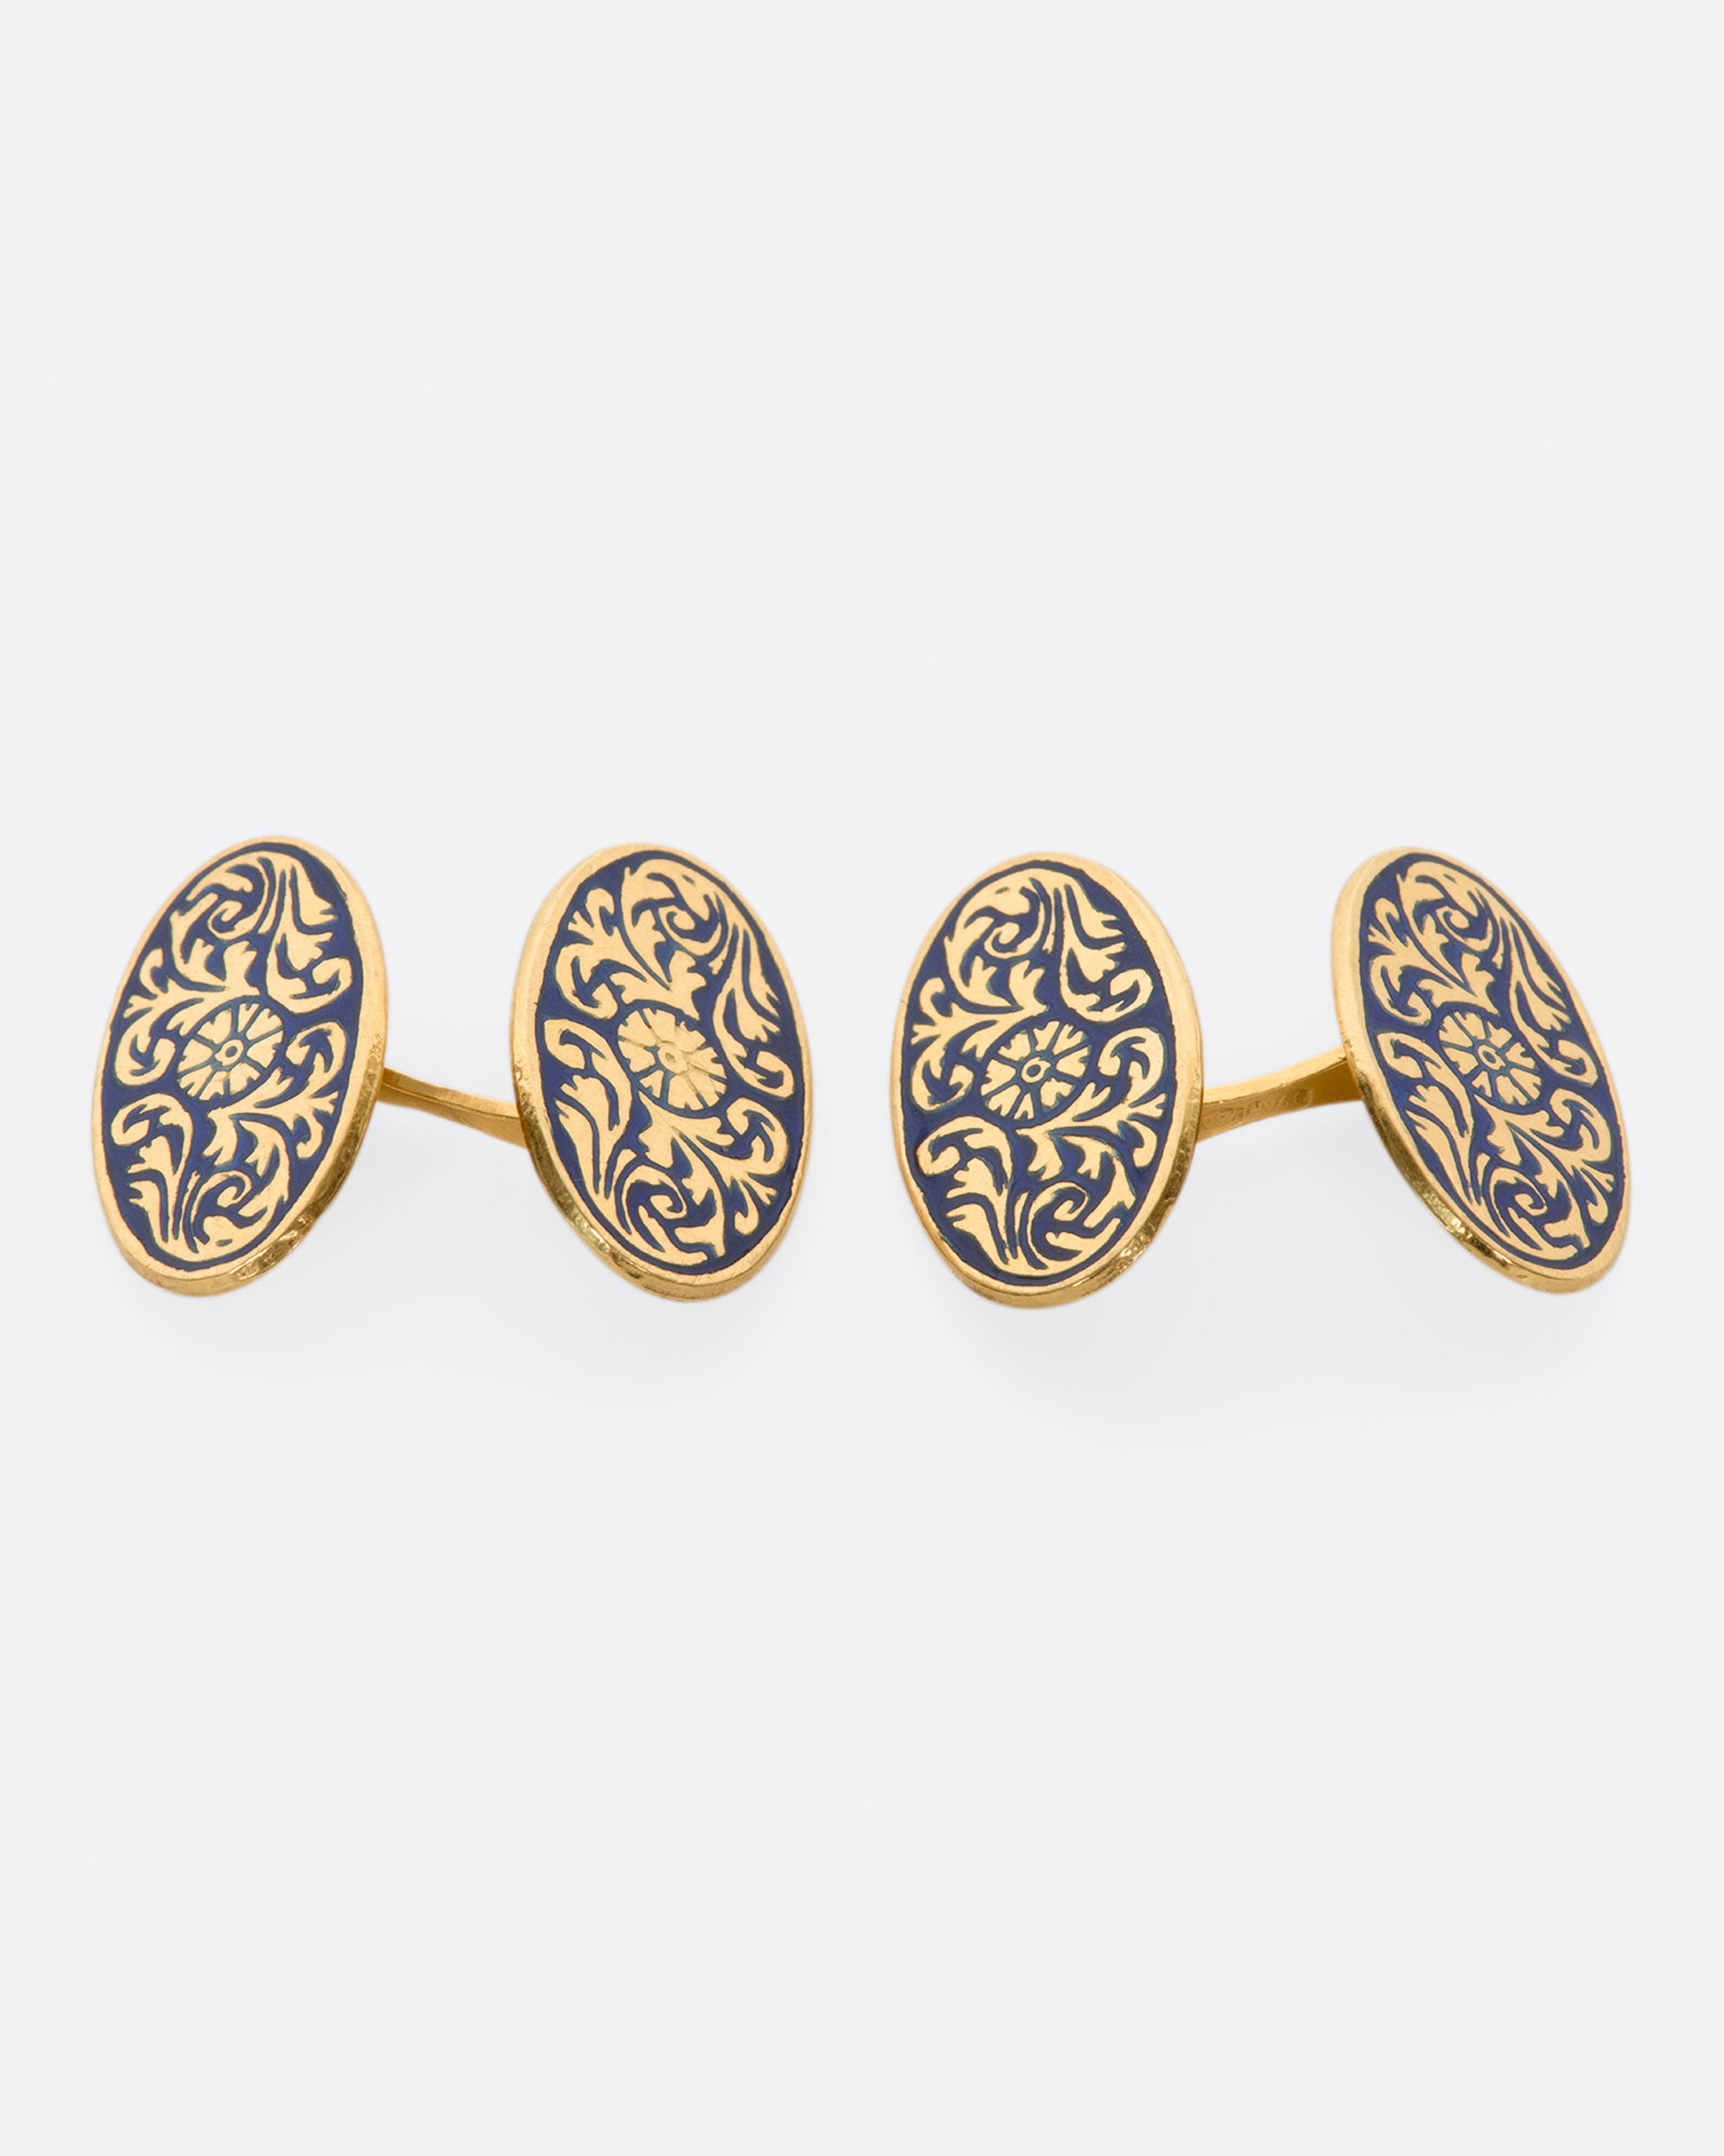 A pair of solid gold vintage cufflinks with intricate flourishes and contrasting dark blue enamel.